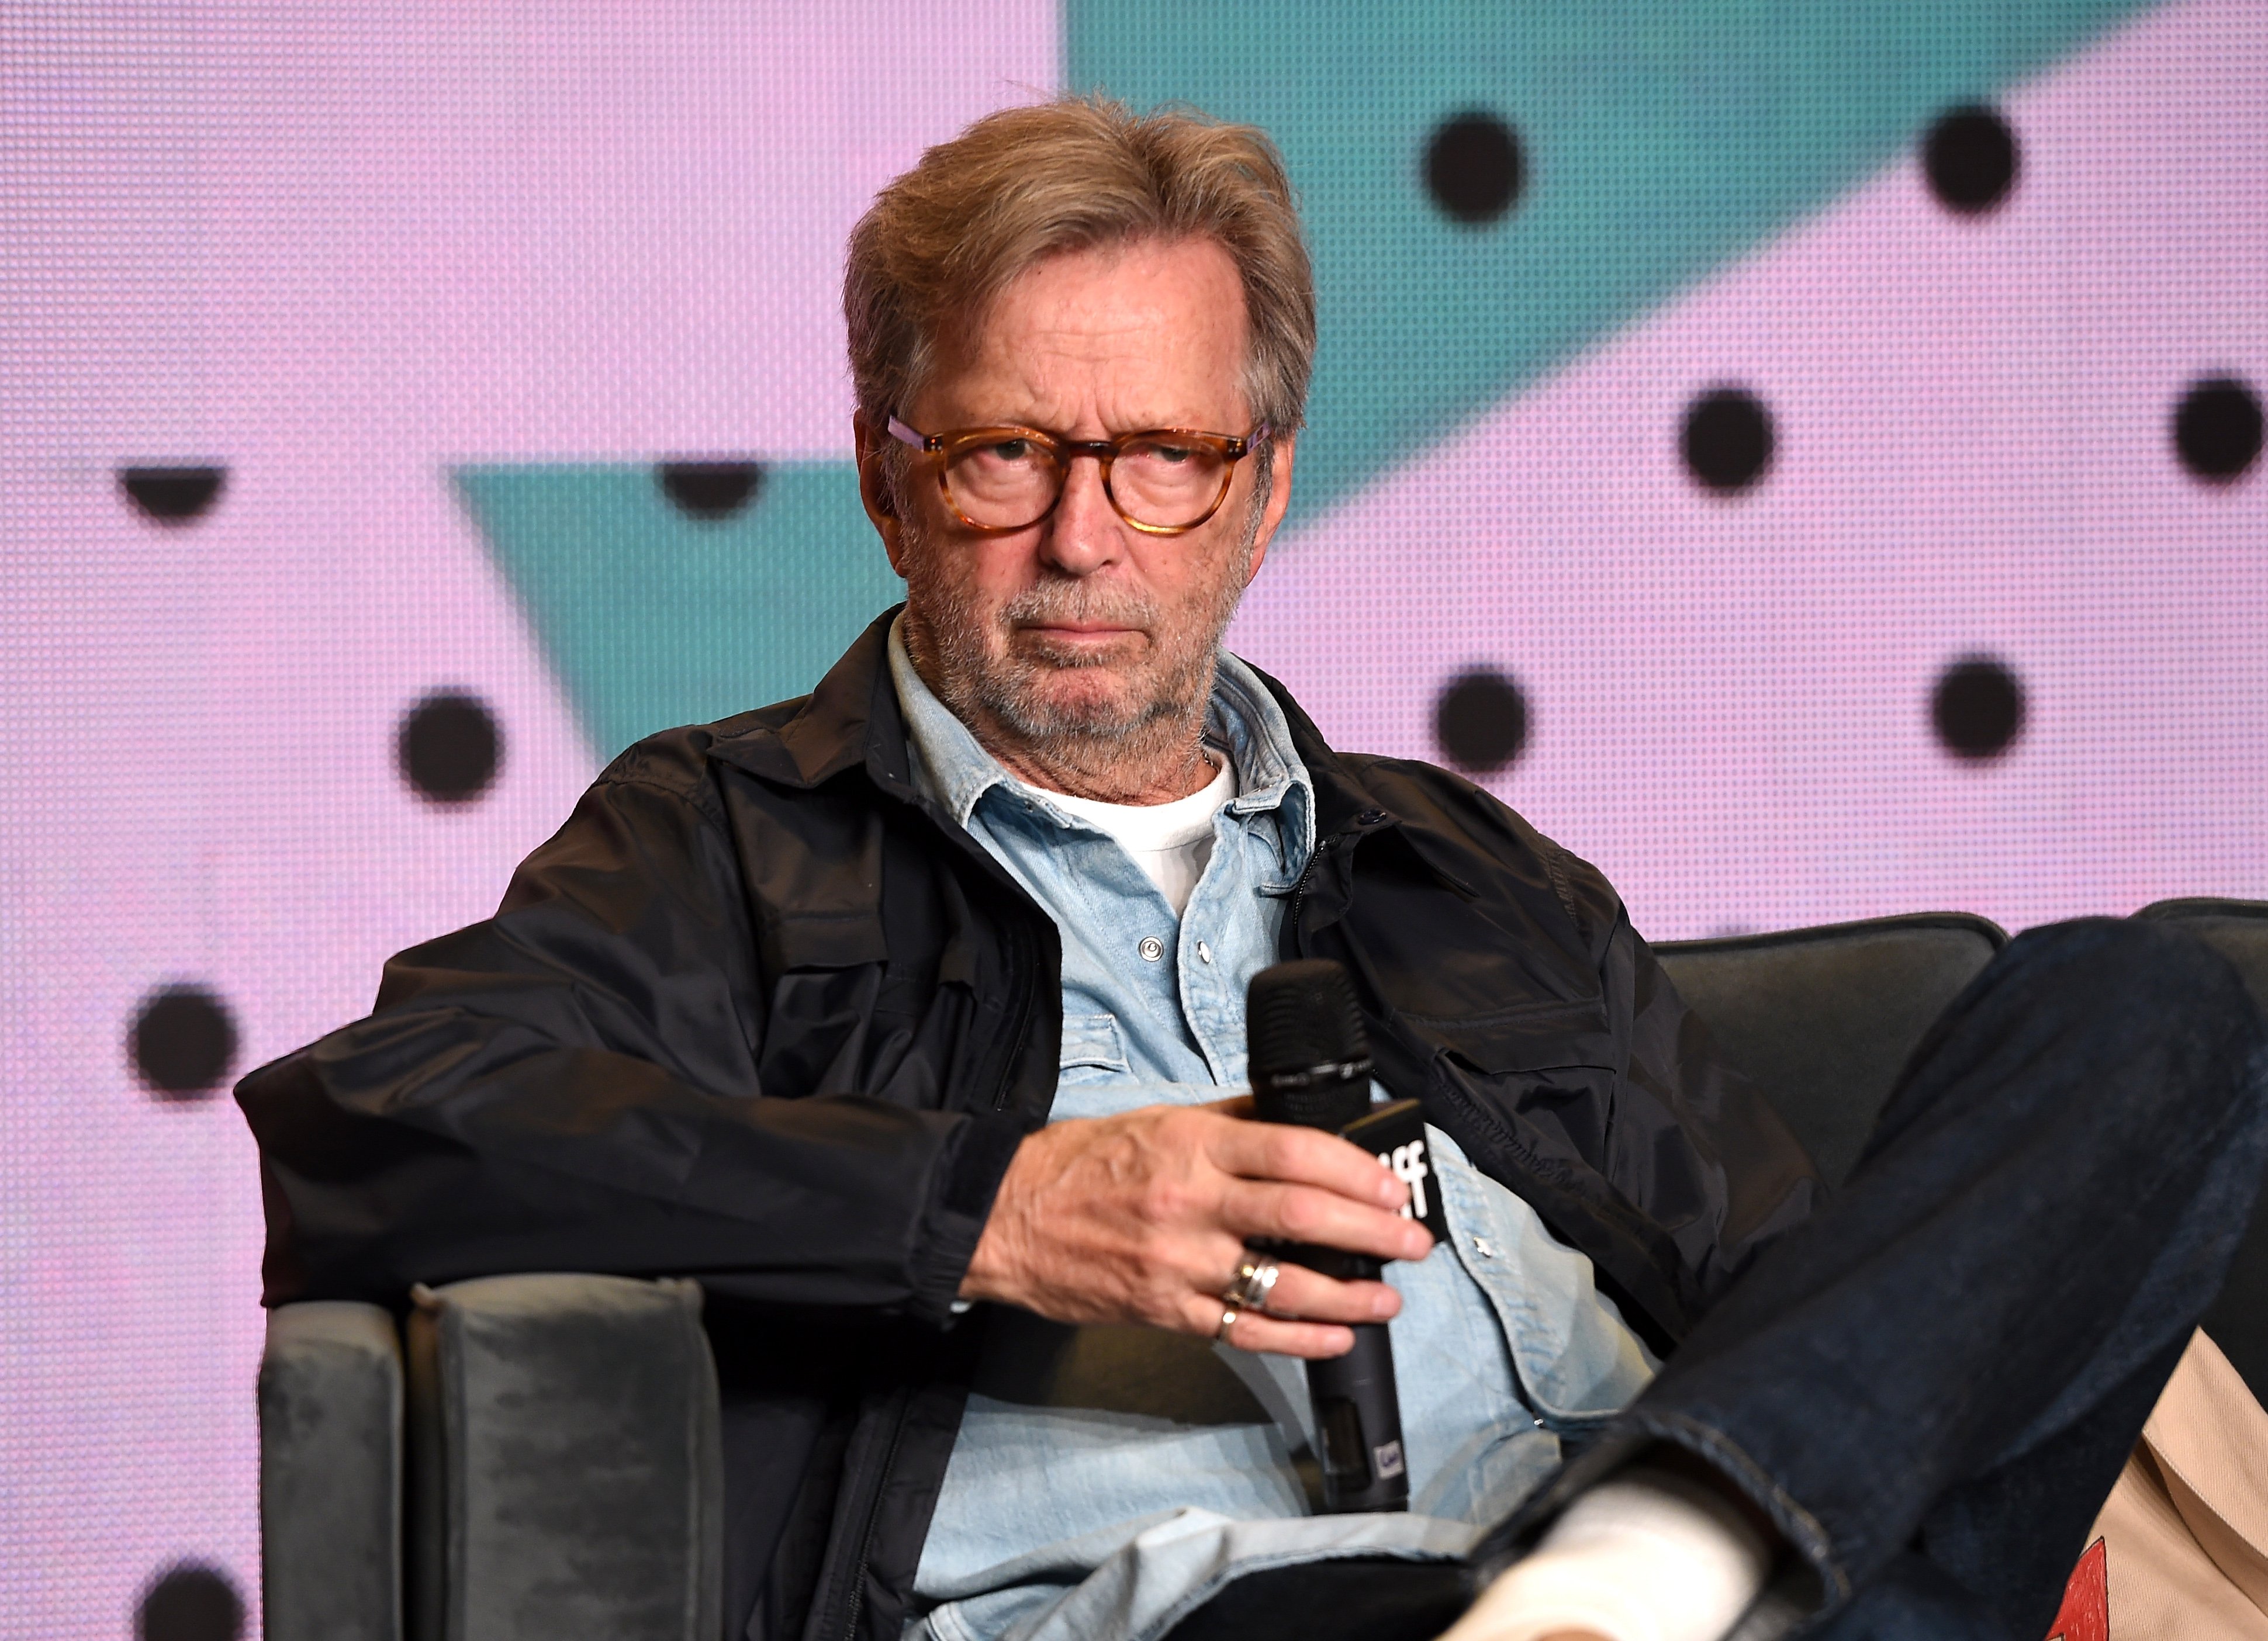 Eric Clapton speaks onstage at "Eric Clapton: Life In 12 Bars" press conference during 2017 Toronto International Film Festival. | Source: Getty Images